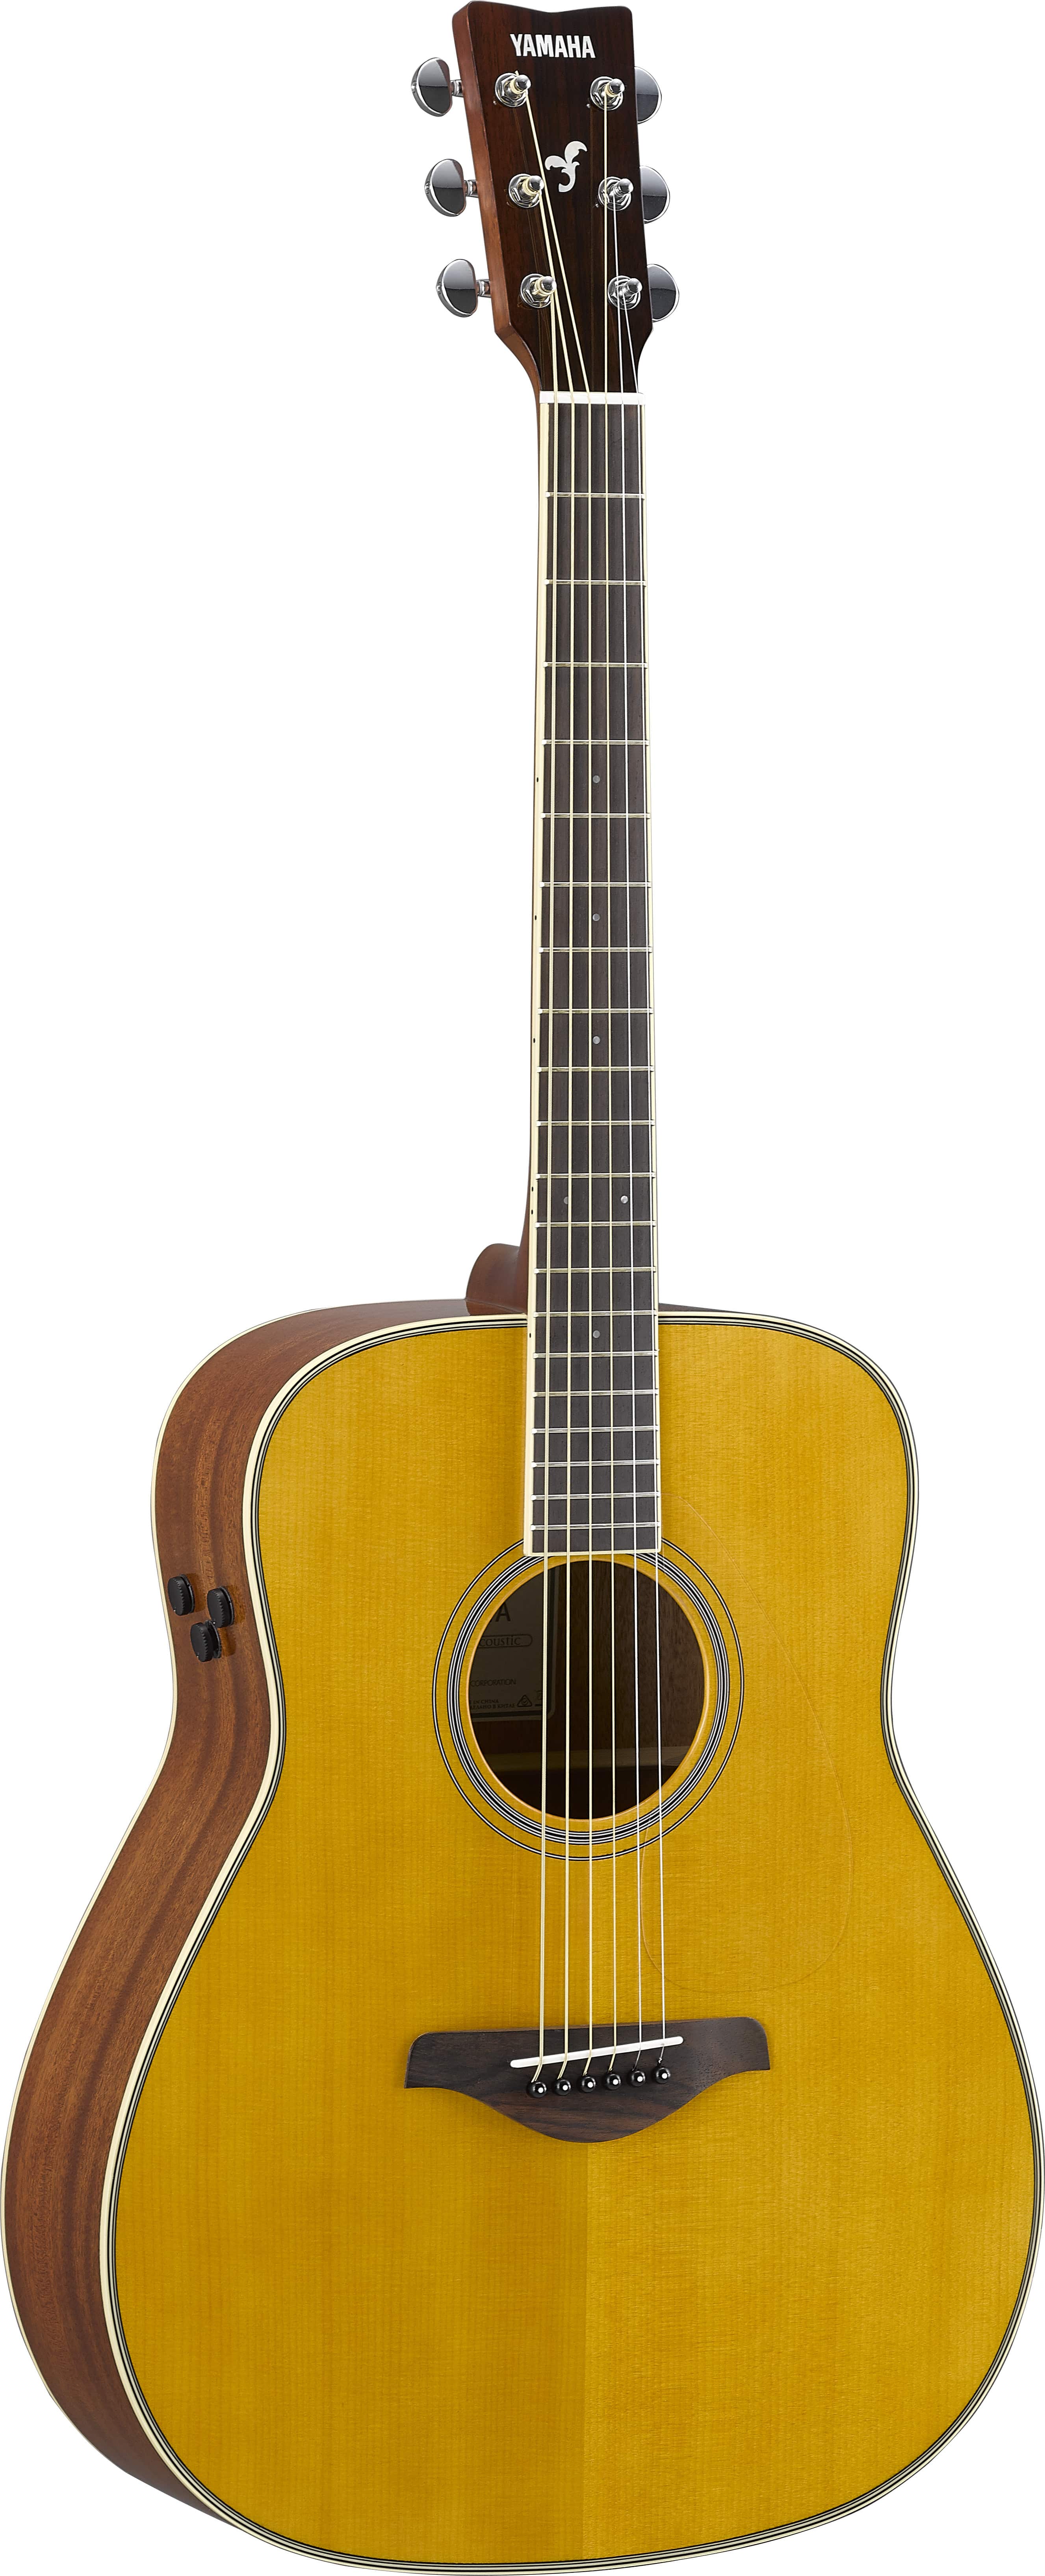 Groundbreaking Yamaha TransAcoustic Technology Comes to Industry Leading FG and FS Series Guitar